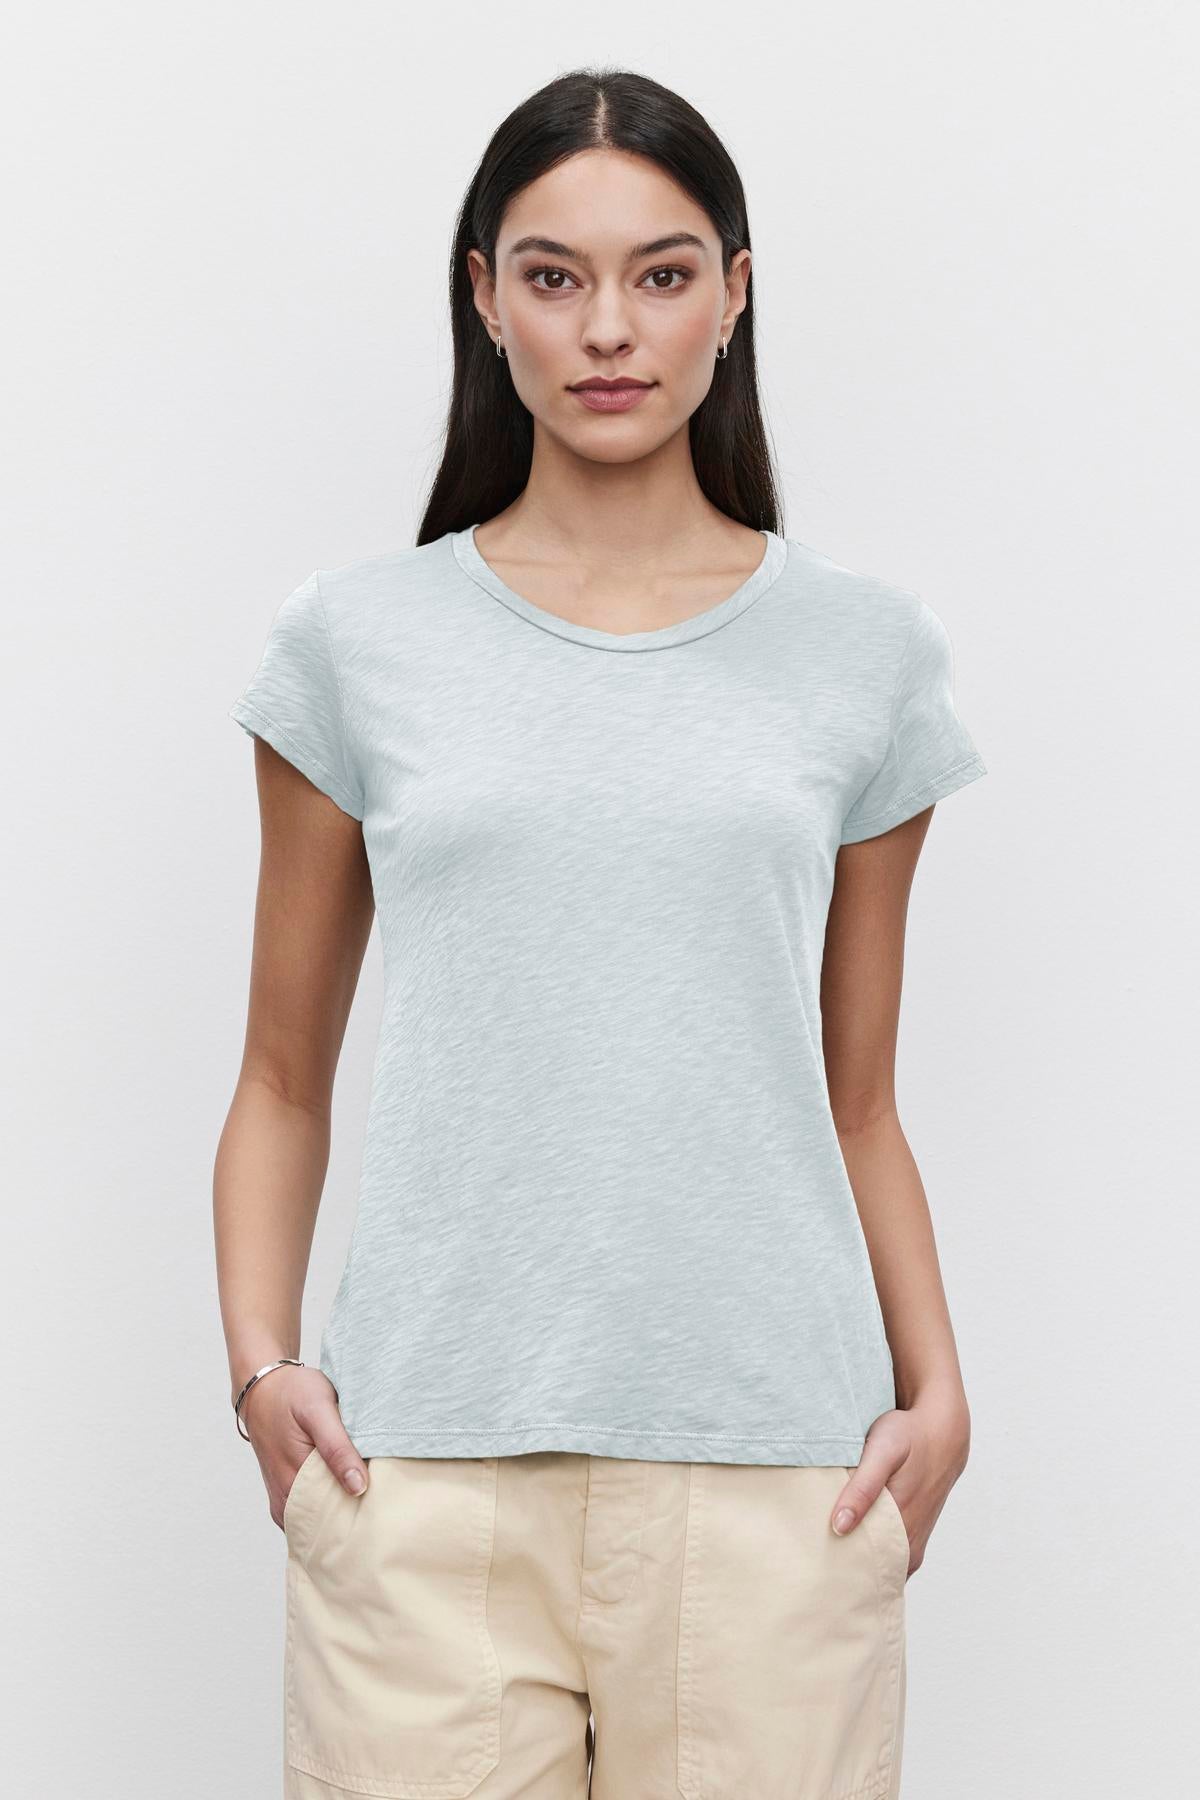   Young woman wearing a light blue Velvet by Graham & Spencer ODELIA COTTON SLUB CREW NECK TEE and beige pants, standing against a white background, looking directly at the camera. 